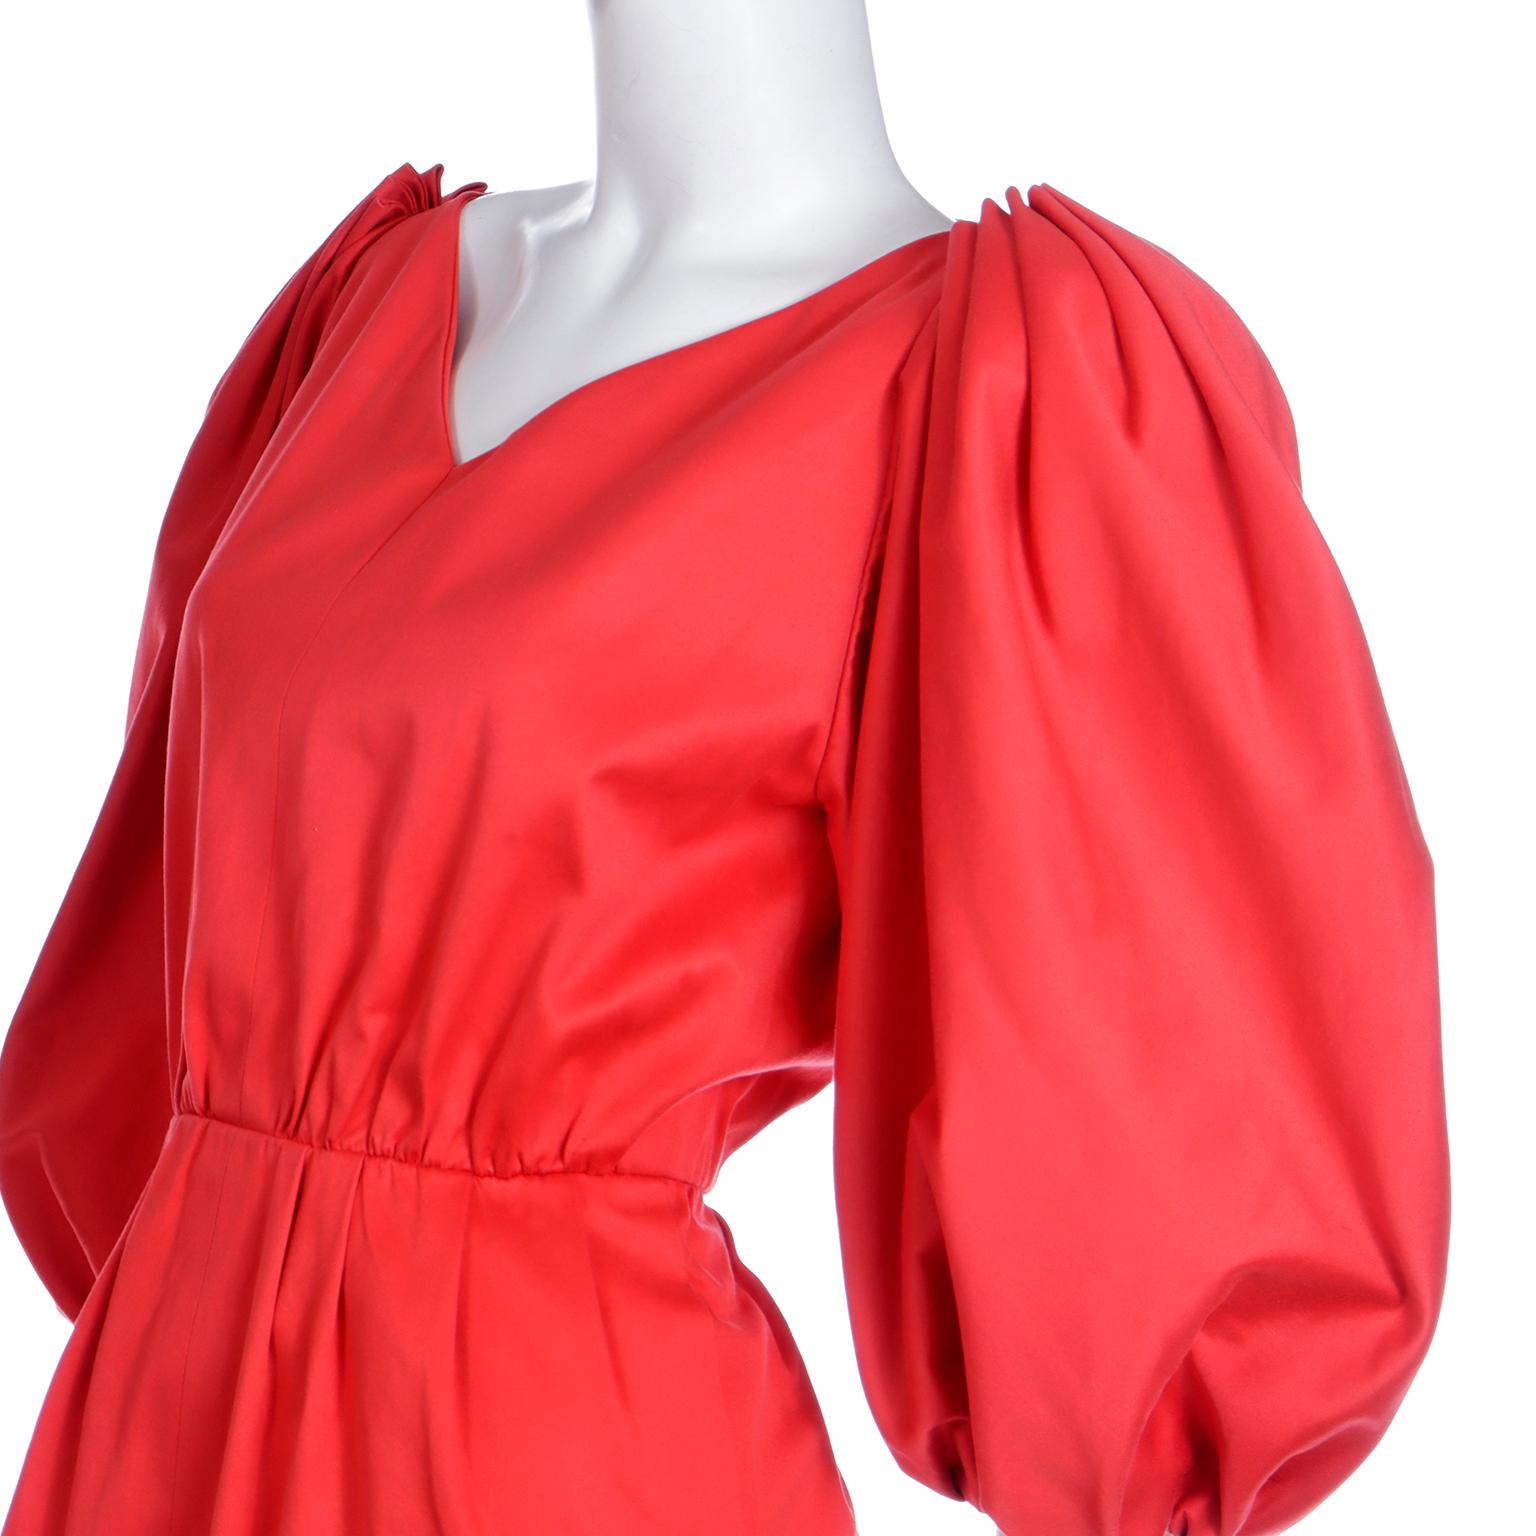 Yves Saint Laurent 1989 Vintage Red Runway Dress with Puff Statement Sleeves 6